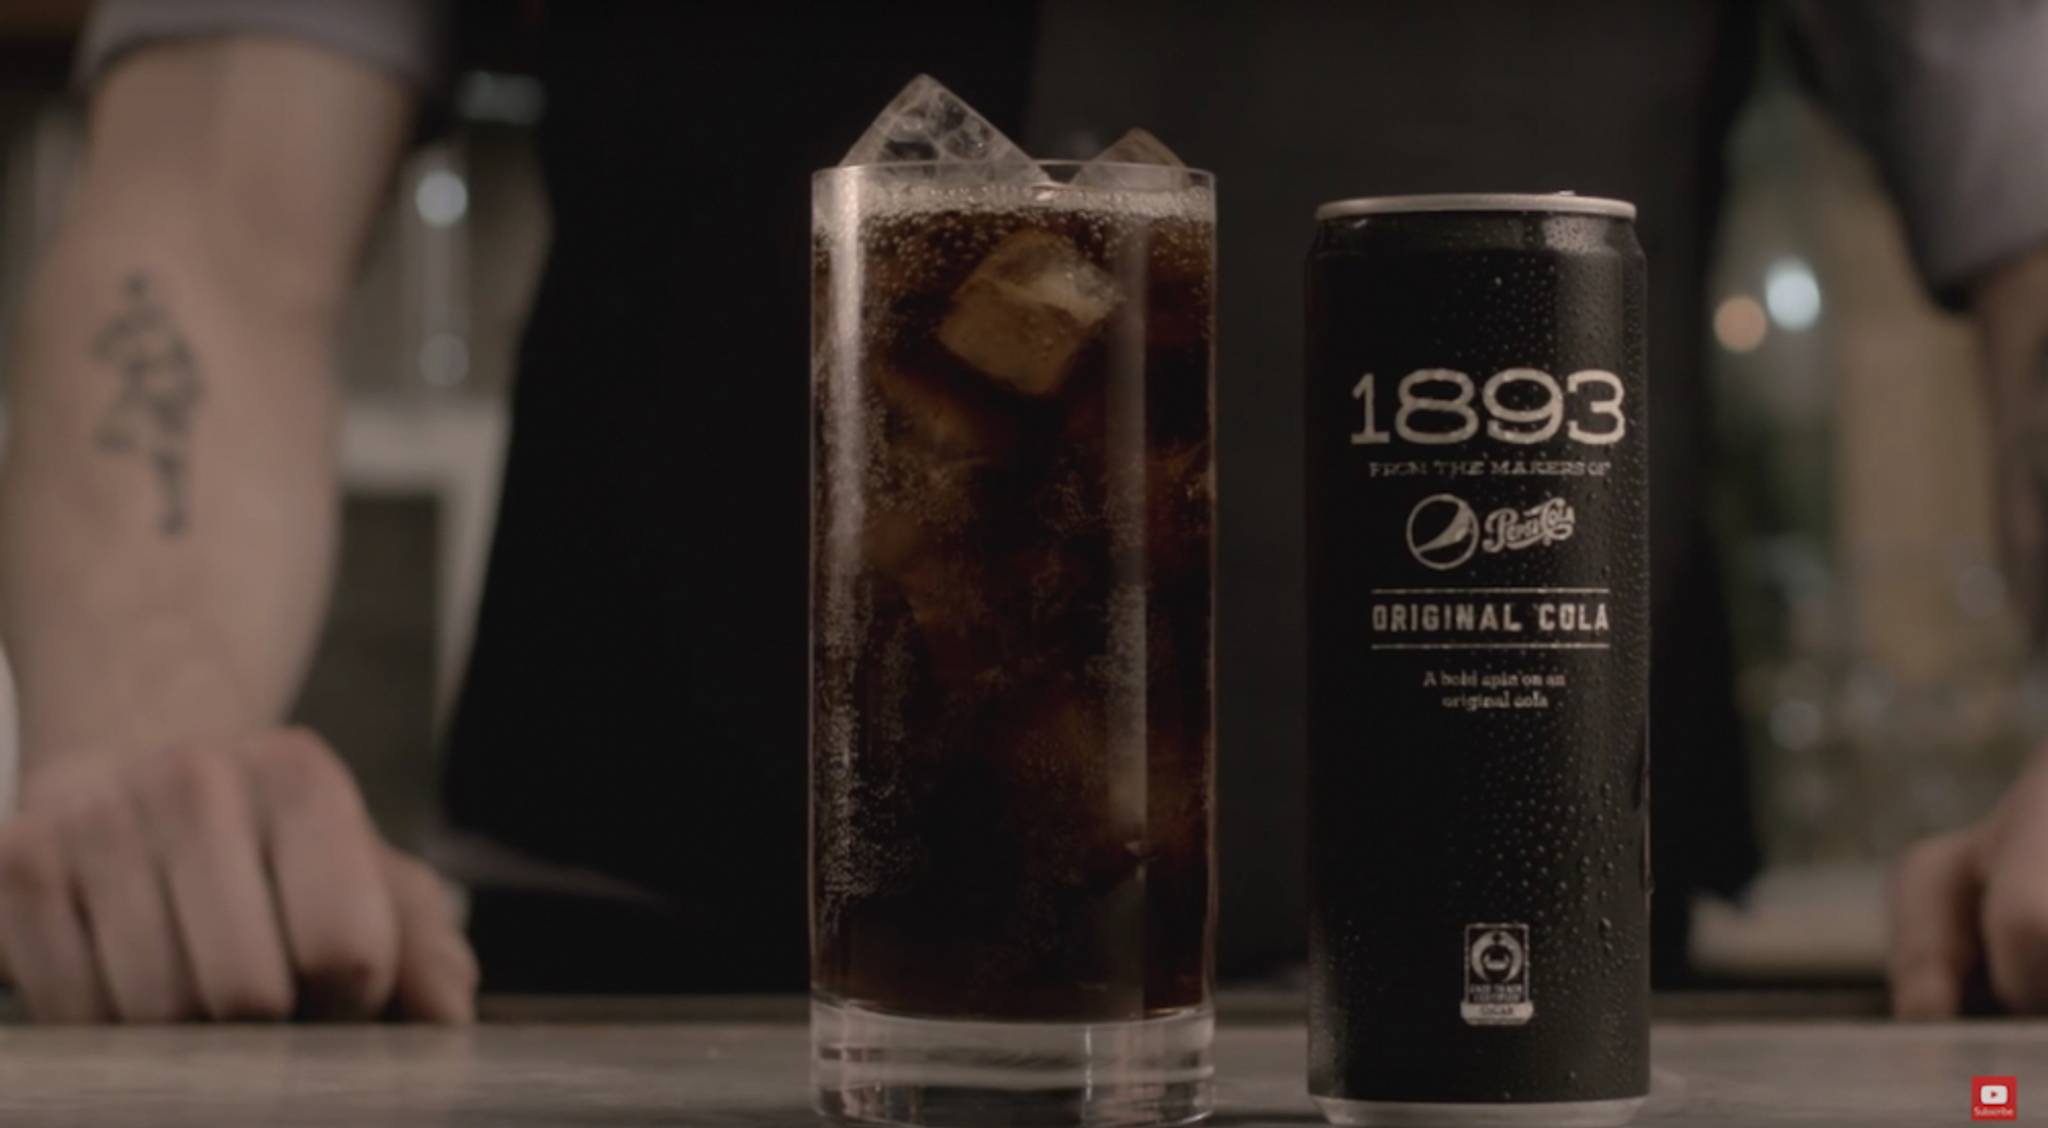 Pepsi hopes to entice with a premium soda experience